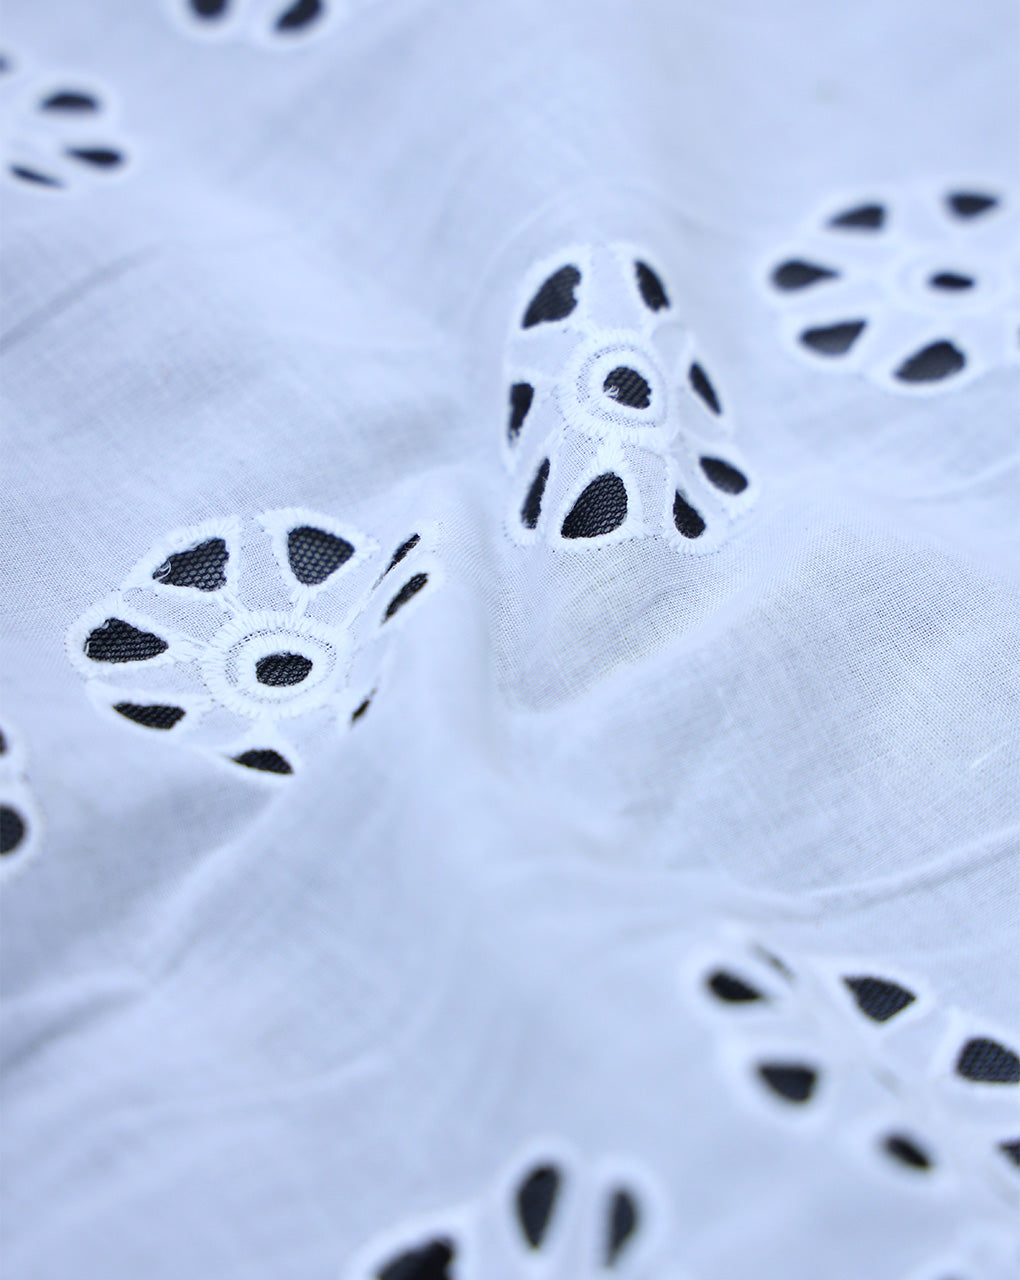 WHITE COTTON SCHIFFLI EMBROIDERY FABRIC (WIDTH:40-42 INCHES)